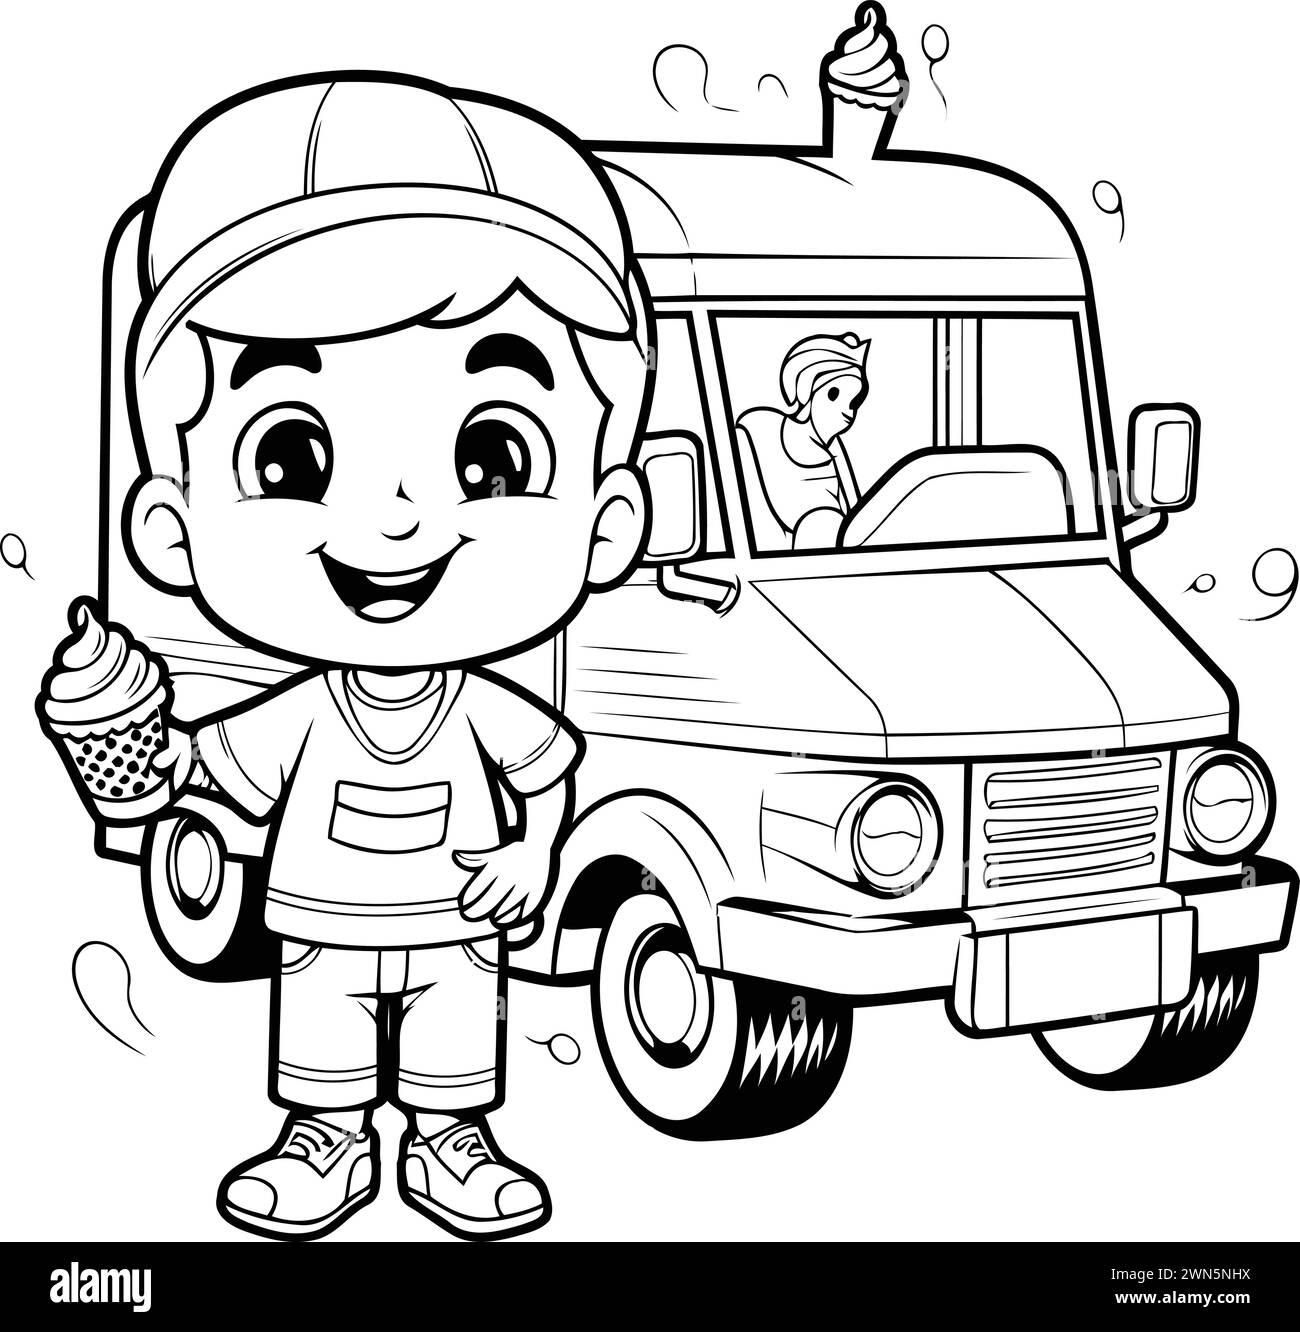 Coloring Page Outline Of Cartoon Delivery Boy with Ice Cream Truck Stock Vector